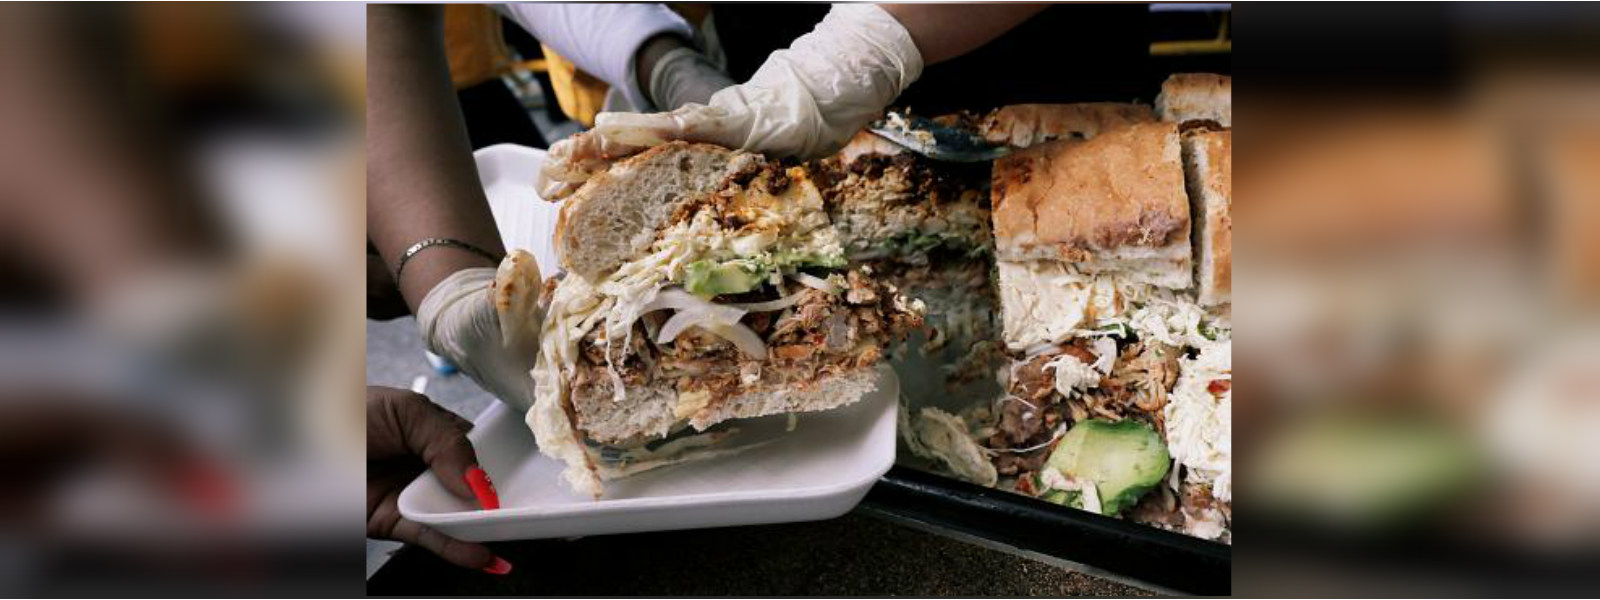 Mexico breaks record for its largest tasty ‘torta’ sandwich